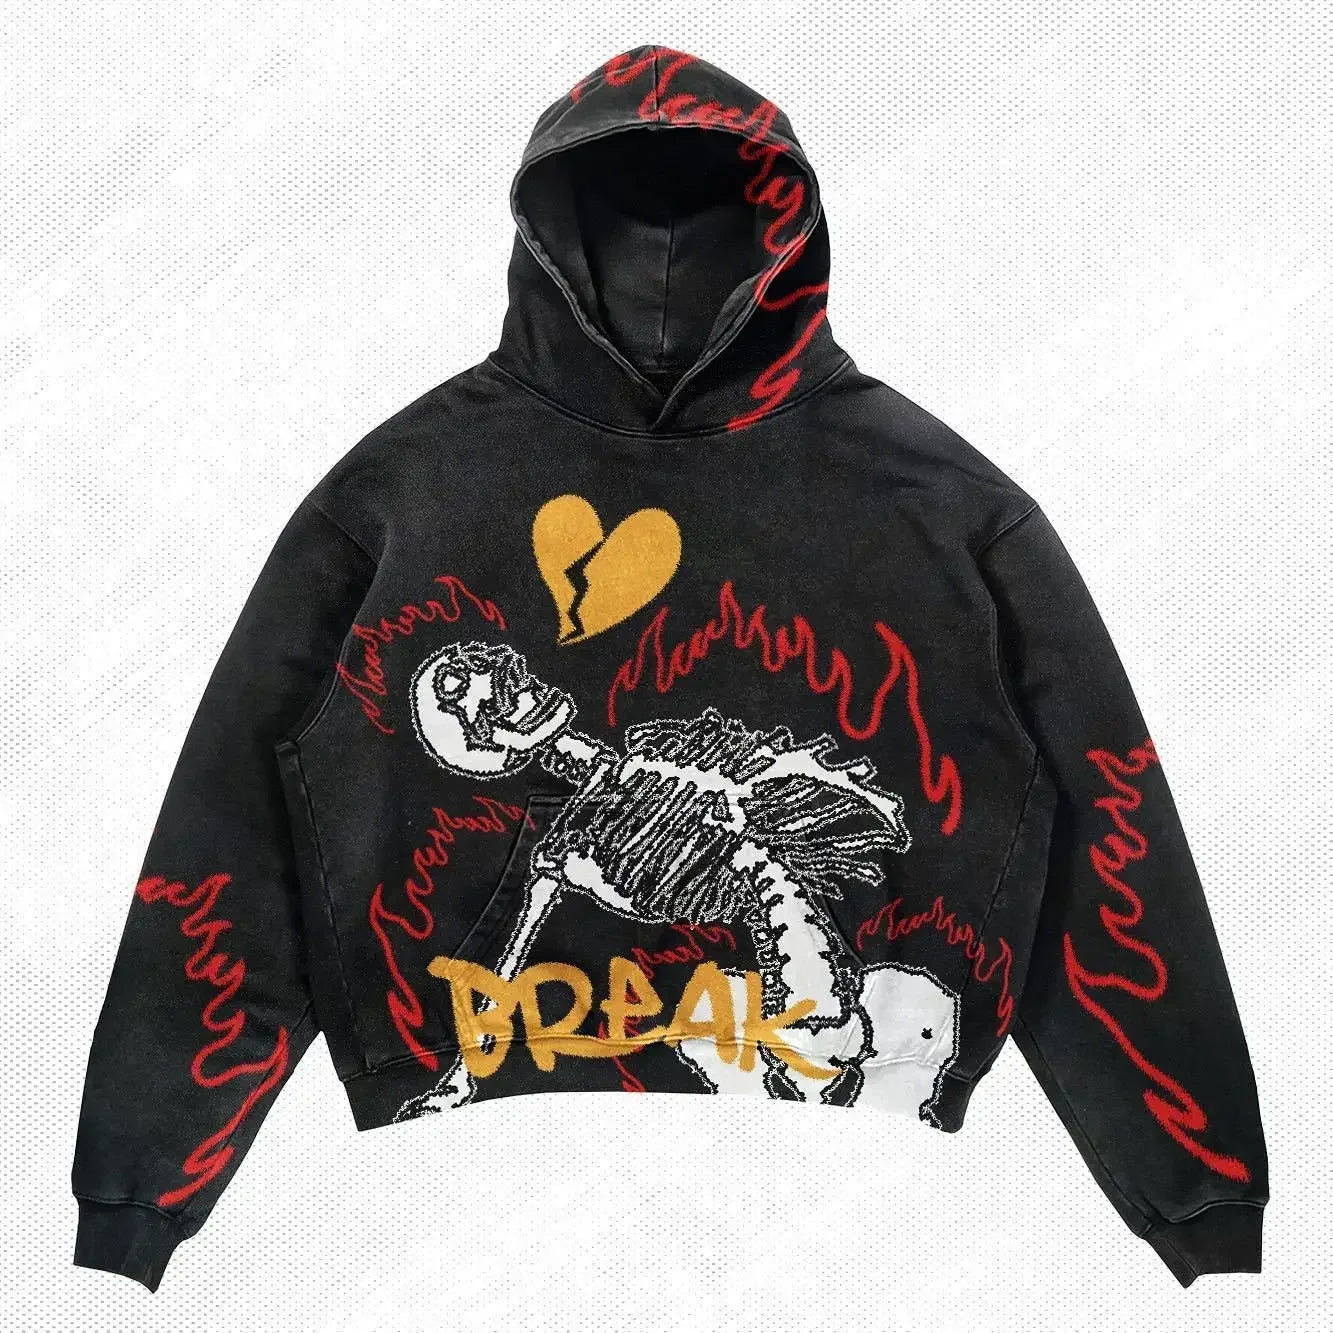 A punk style black hoodie with a skeleton design, red and yellow flame graphics, a broken heart, and the word "BREAK" at the bottom. Made from comfortable polyester, this standout piece is perfect for men's hoodies collections. Introducing the Explosions Printed Skull Y2K Retro Hooded Sweater Coat Street Style Gothic Casual Fashion Hooded Sweater Men's Female by Maramalive™.